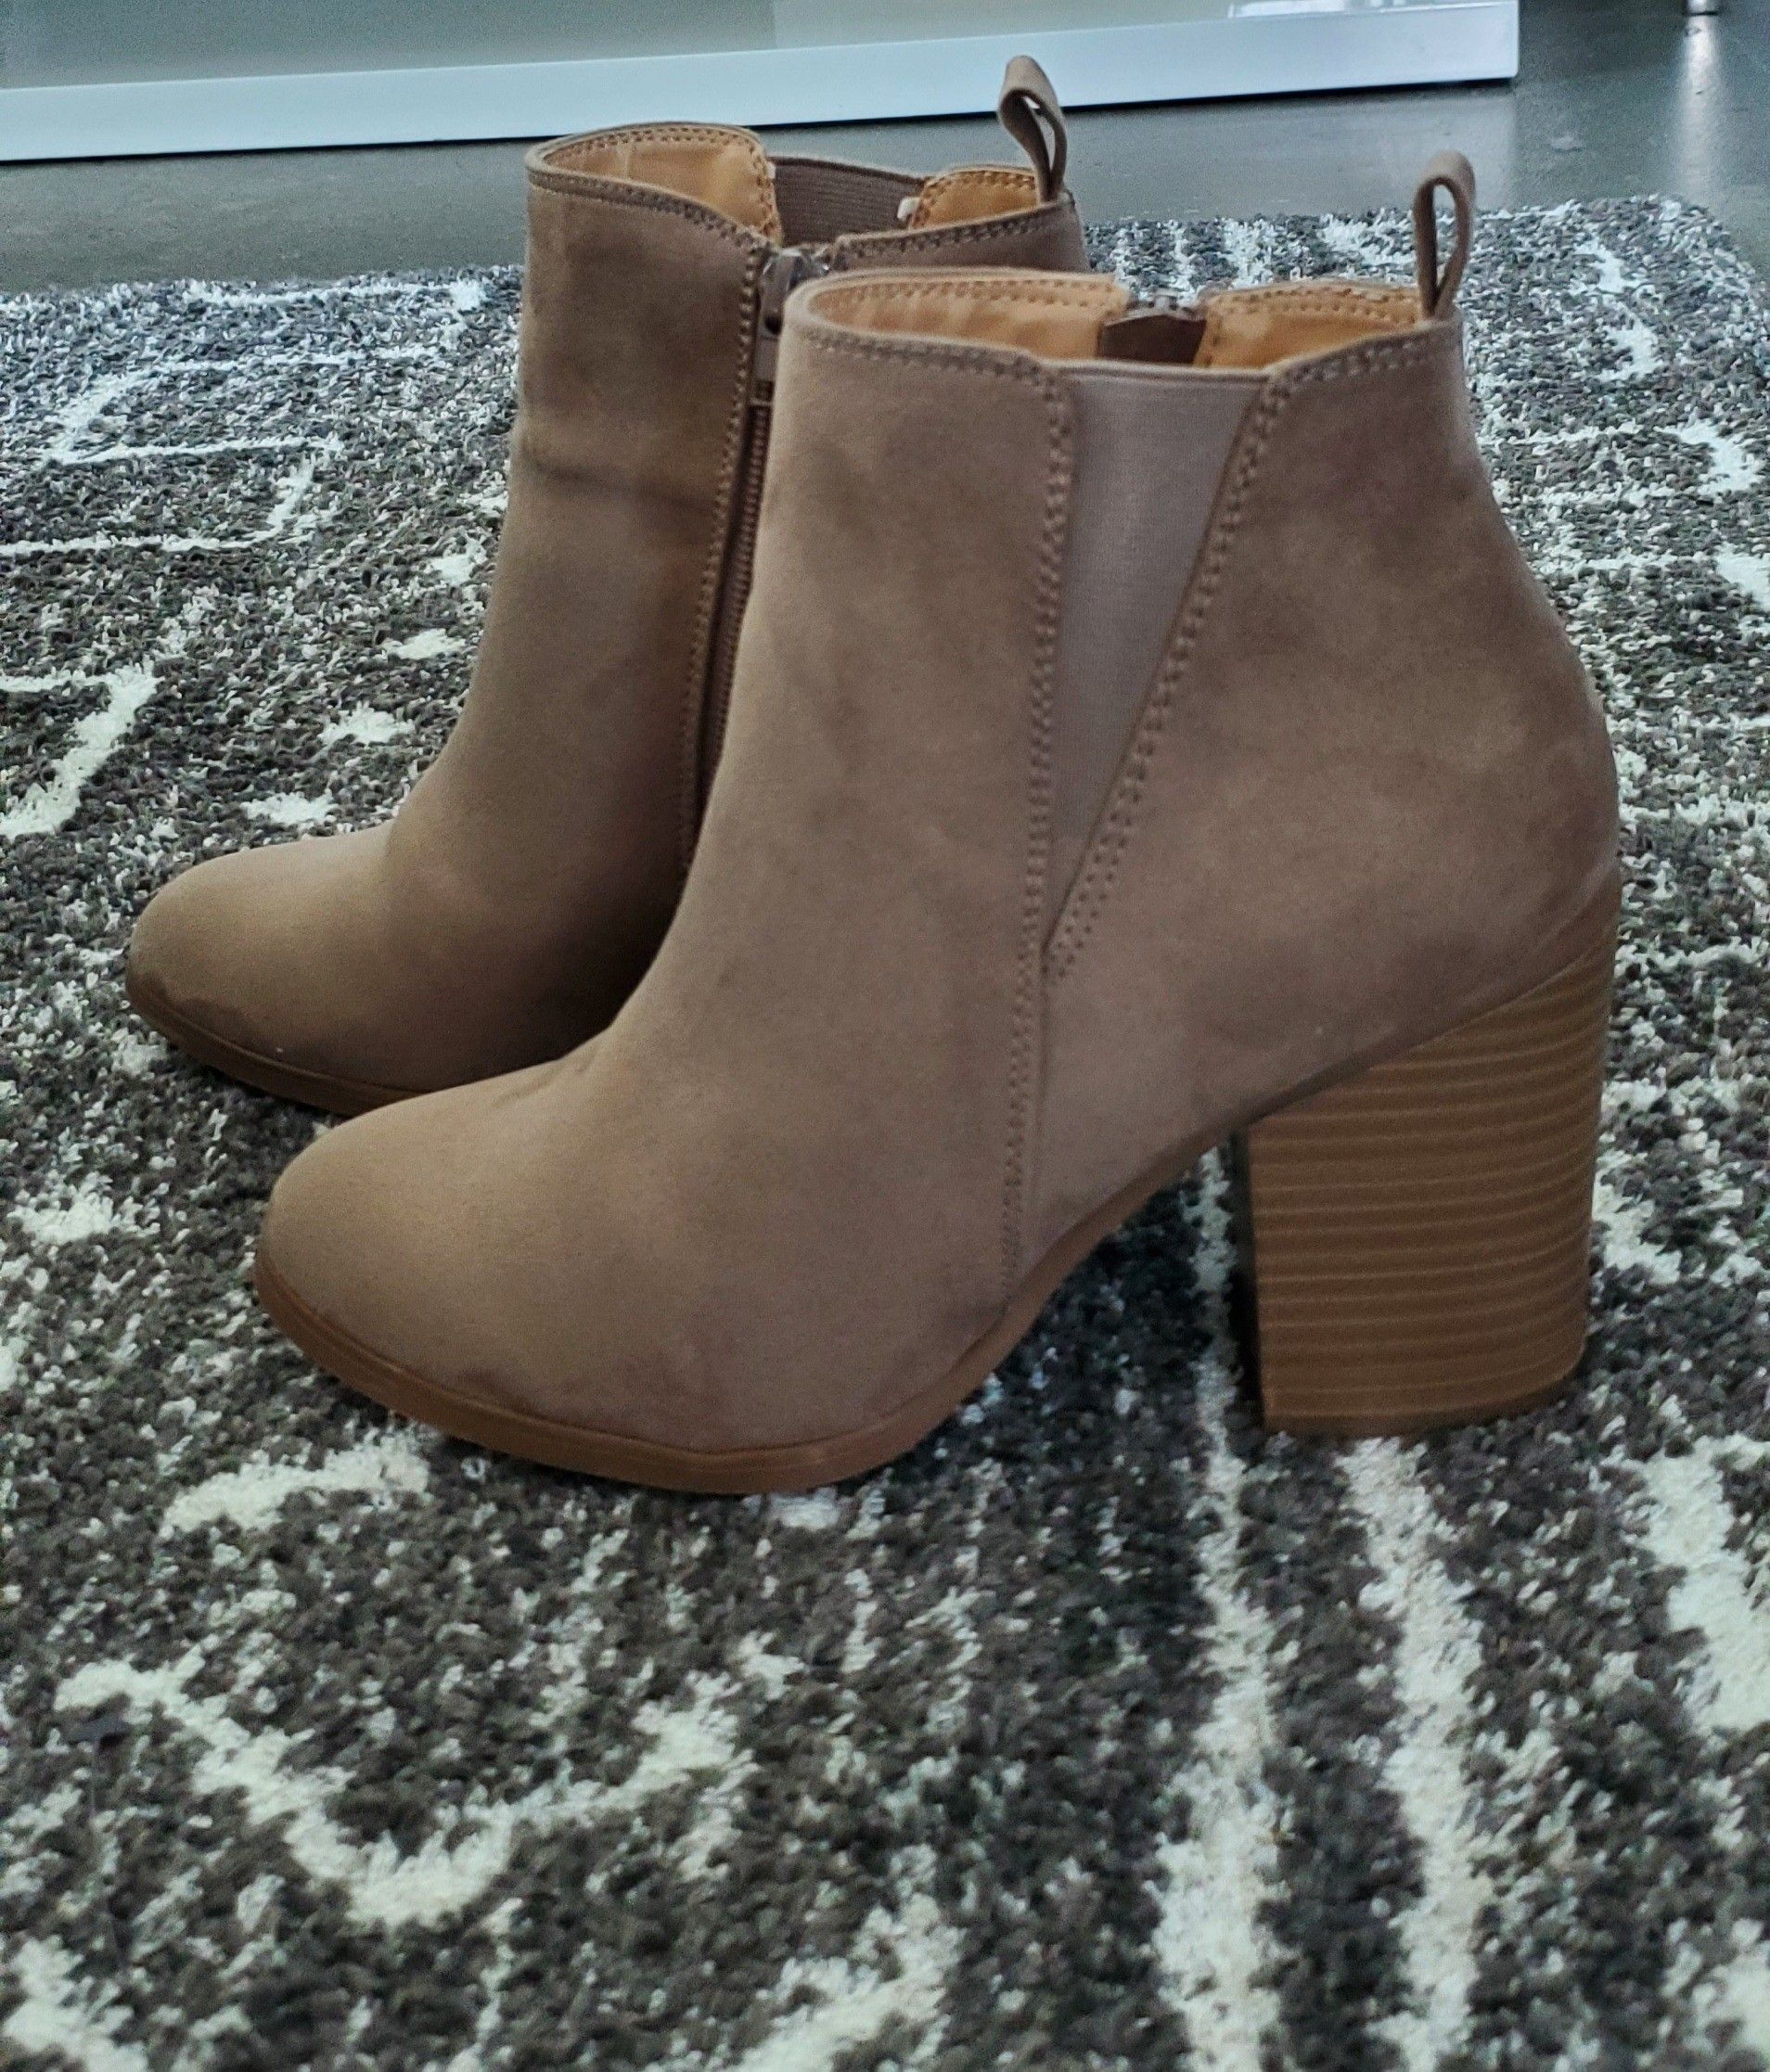 EXPRESS beige boots (size 6) - Reduced Price